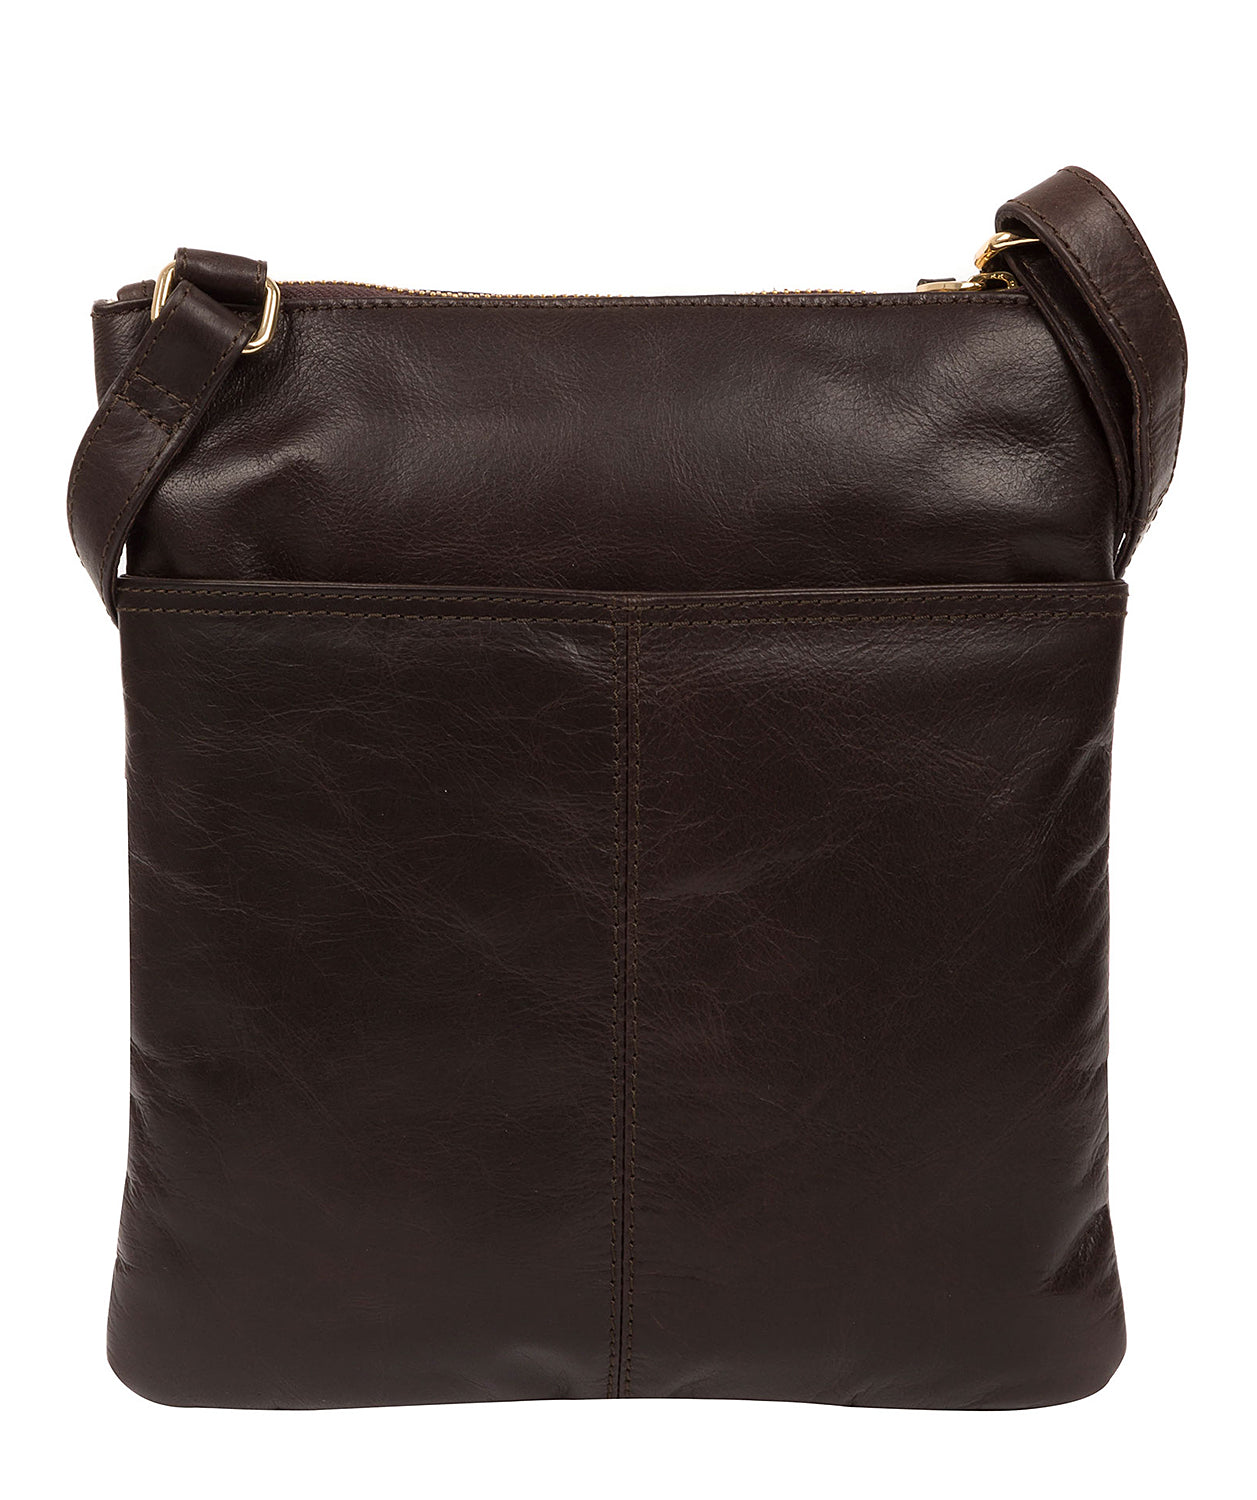 Pure Luxuries Leather Crossbody Bag Chestnut - Briony | Chestnut ...